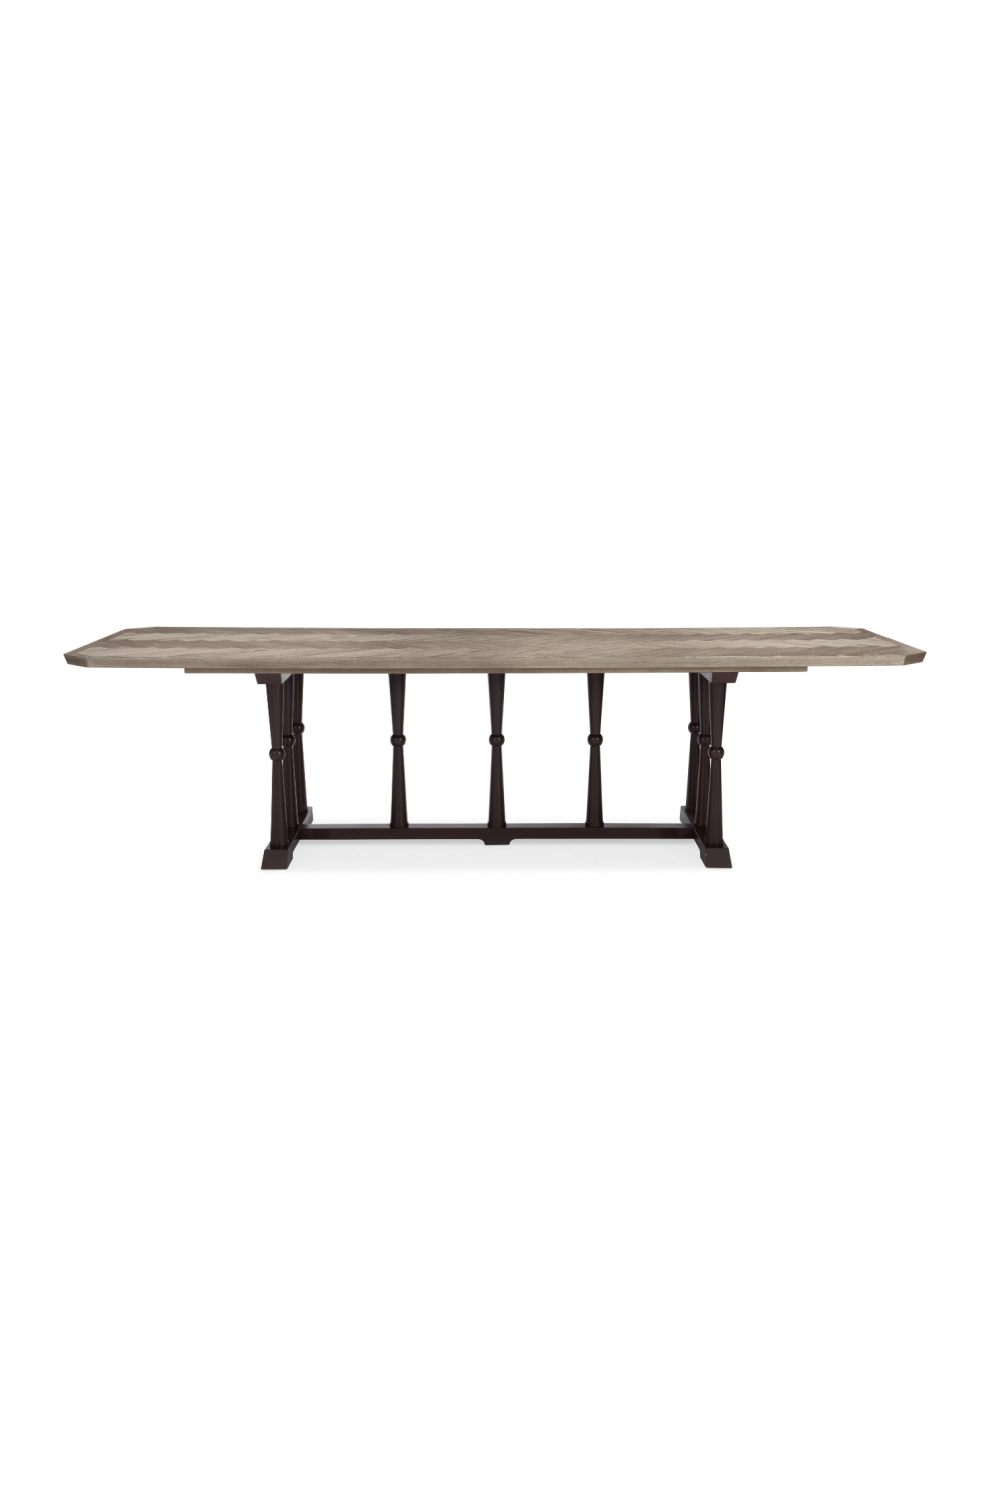 Ash Driftwood Classic Dining Table | Caracole Dinner Circuit 96 | Oroa.com